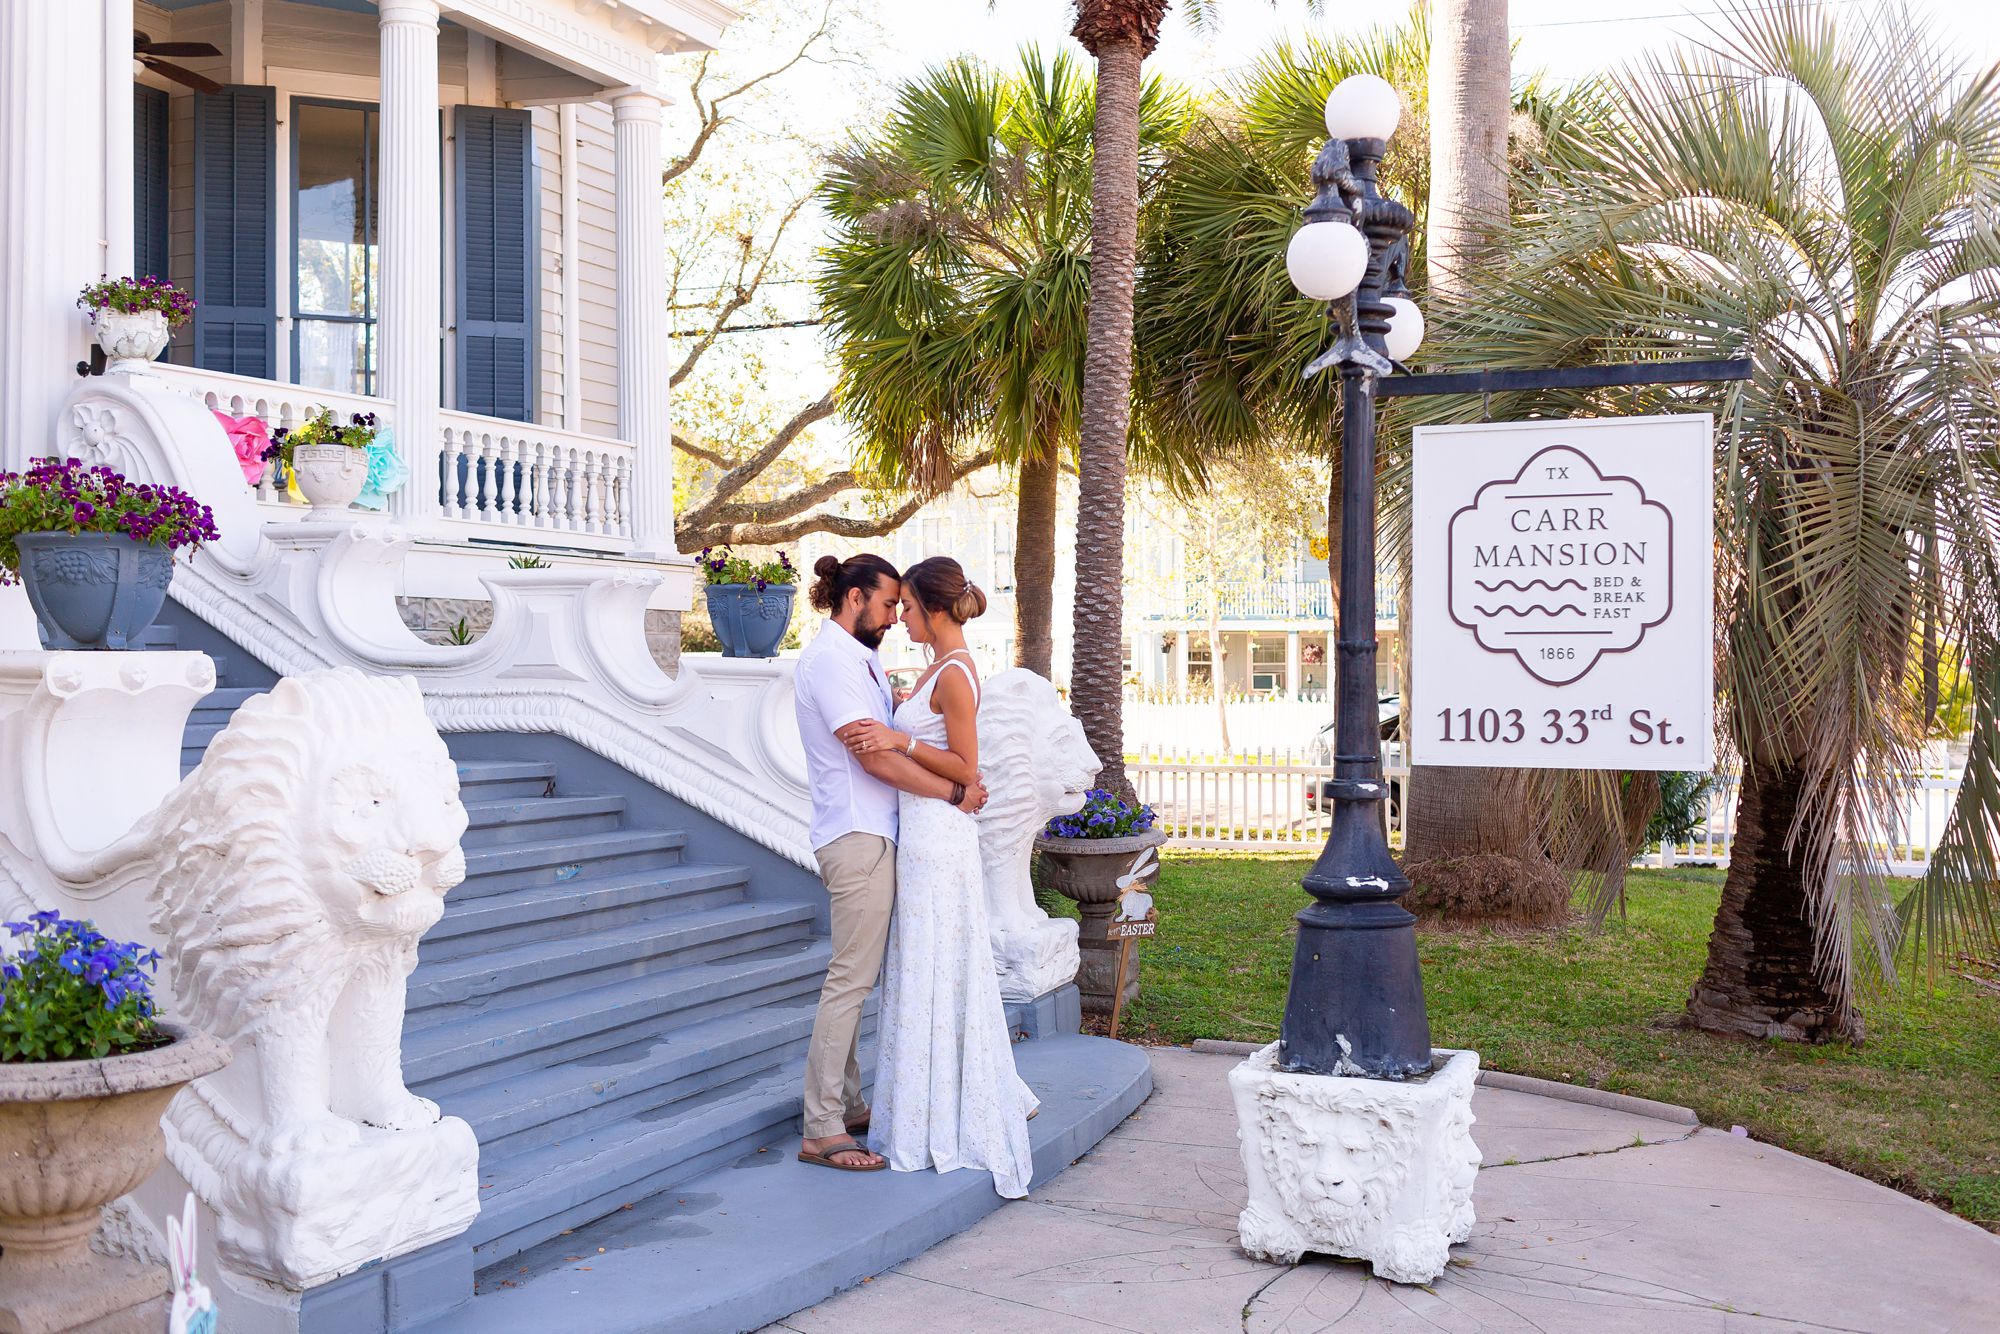 A bride and groom embrace on the front steps of the Carr Mansion.